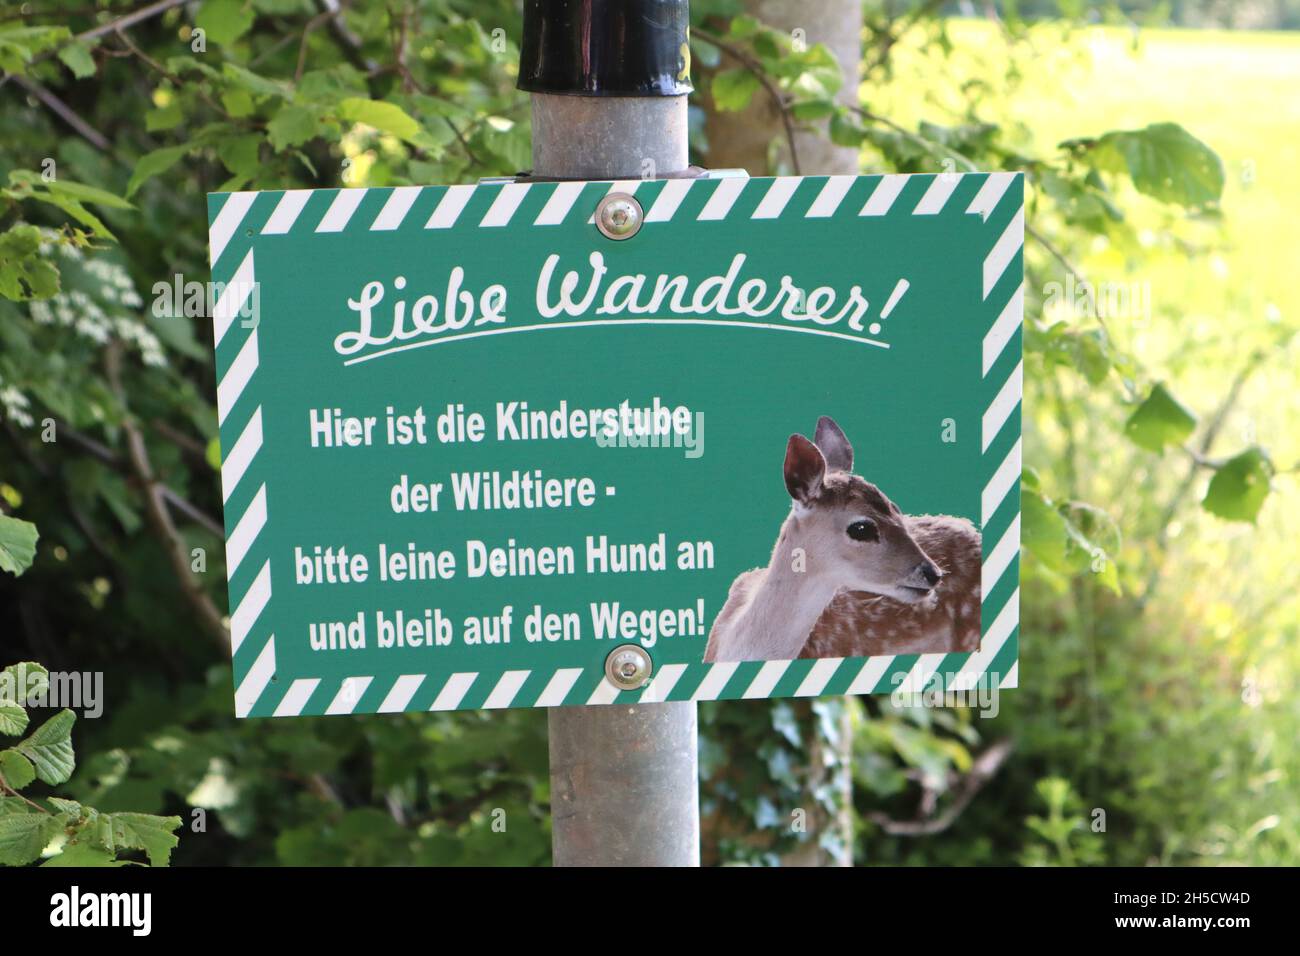 Gamekeeping, plea for visitors to leash their dog, Germany Stock Photo